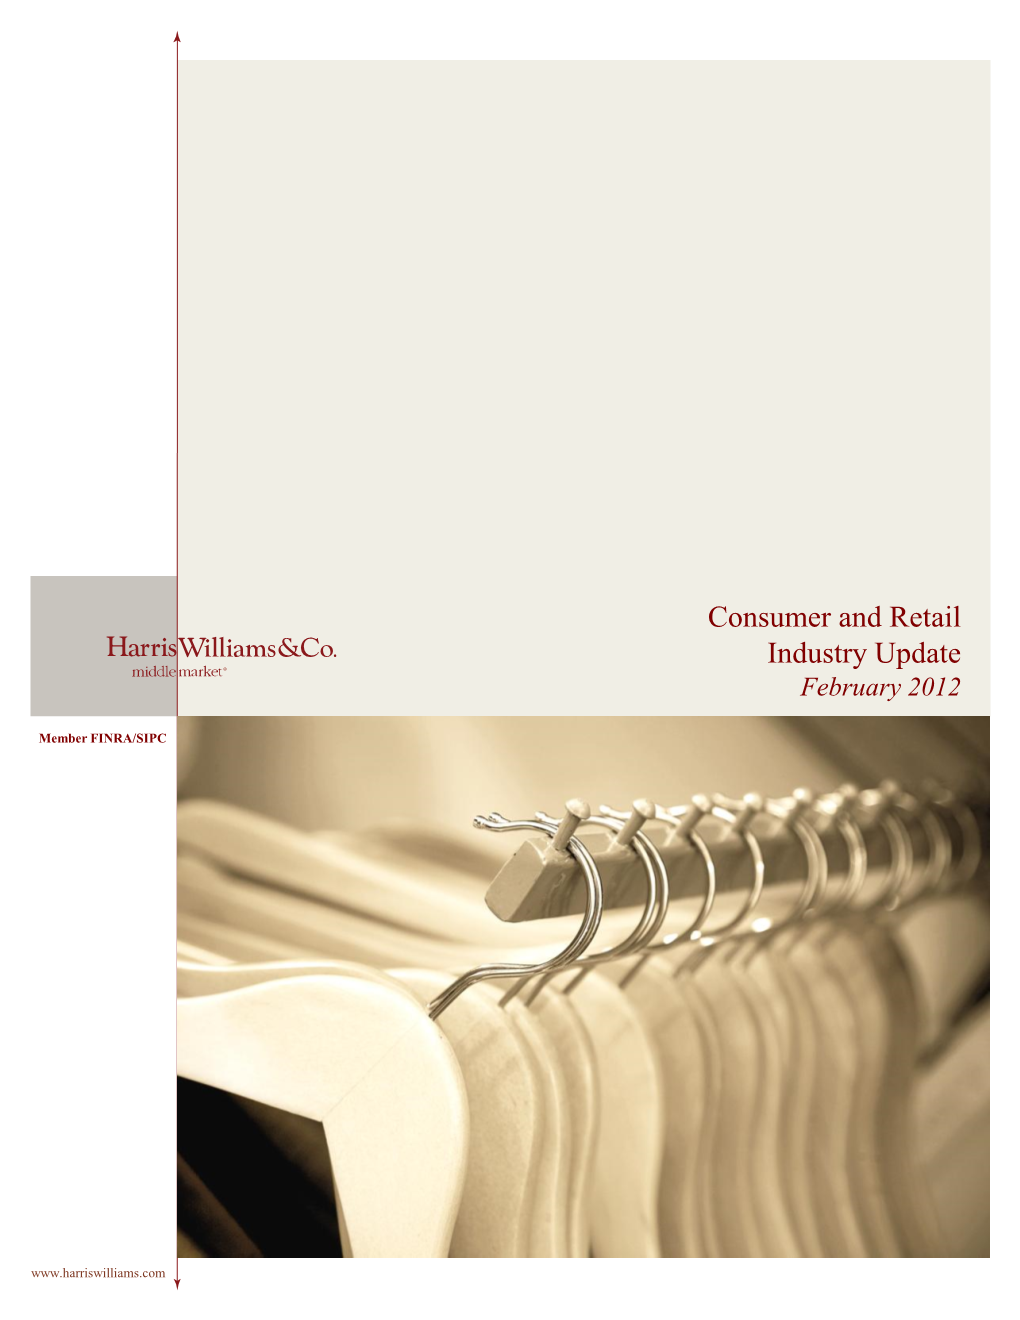 Consumer and Retail Industry Update February 2012